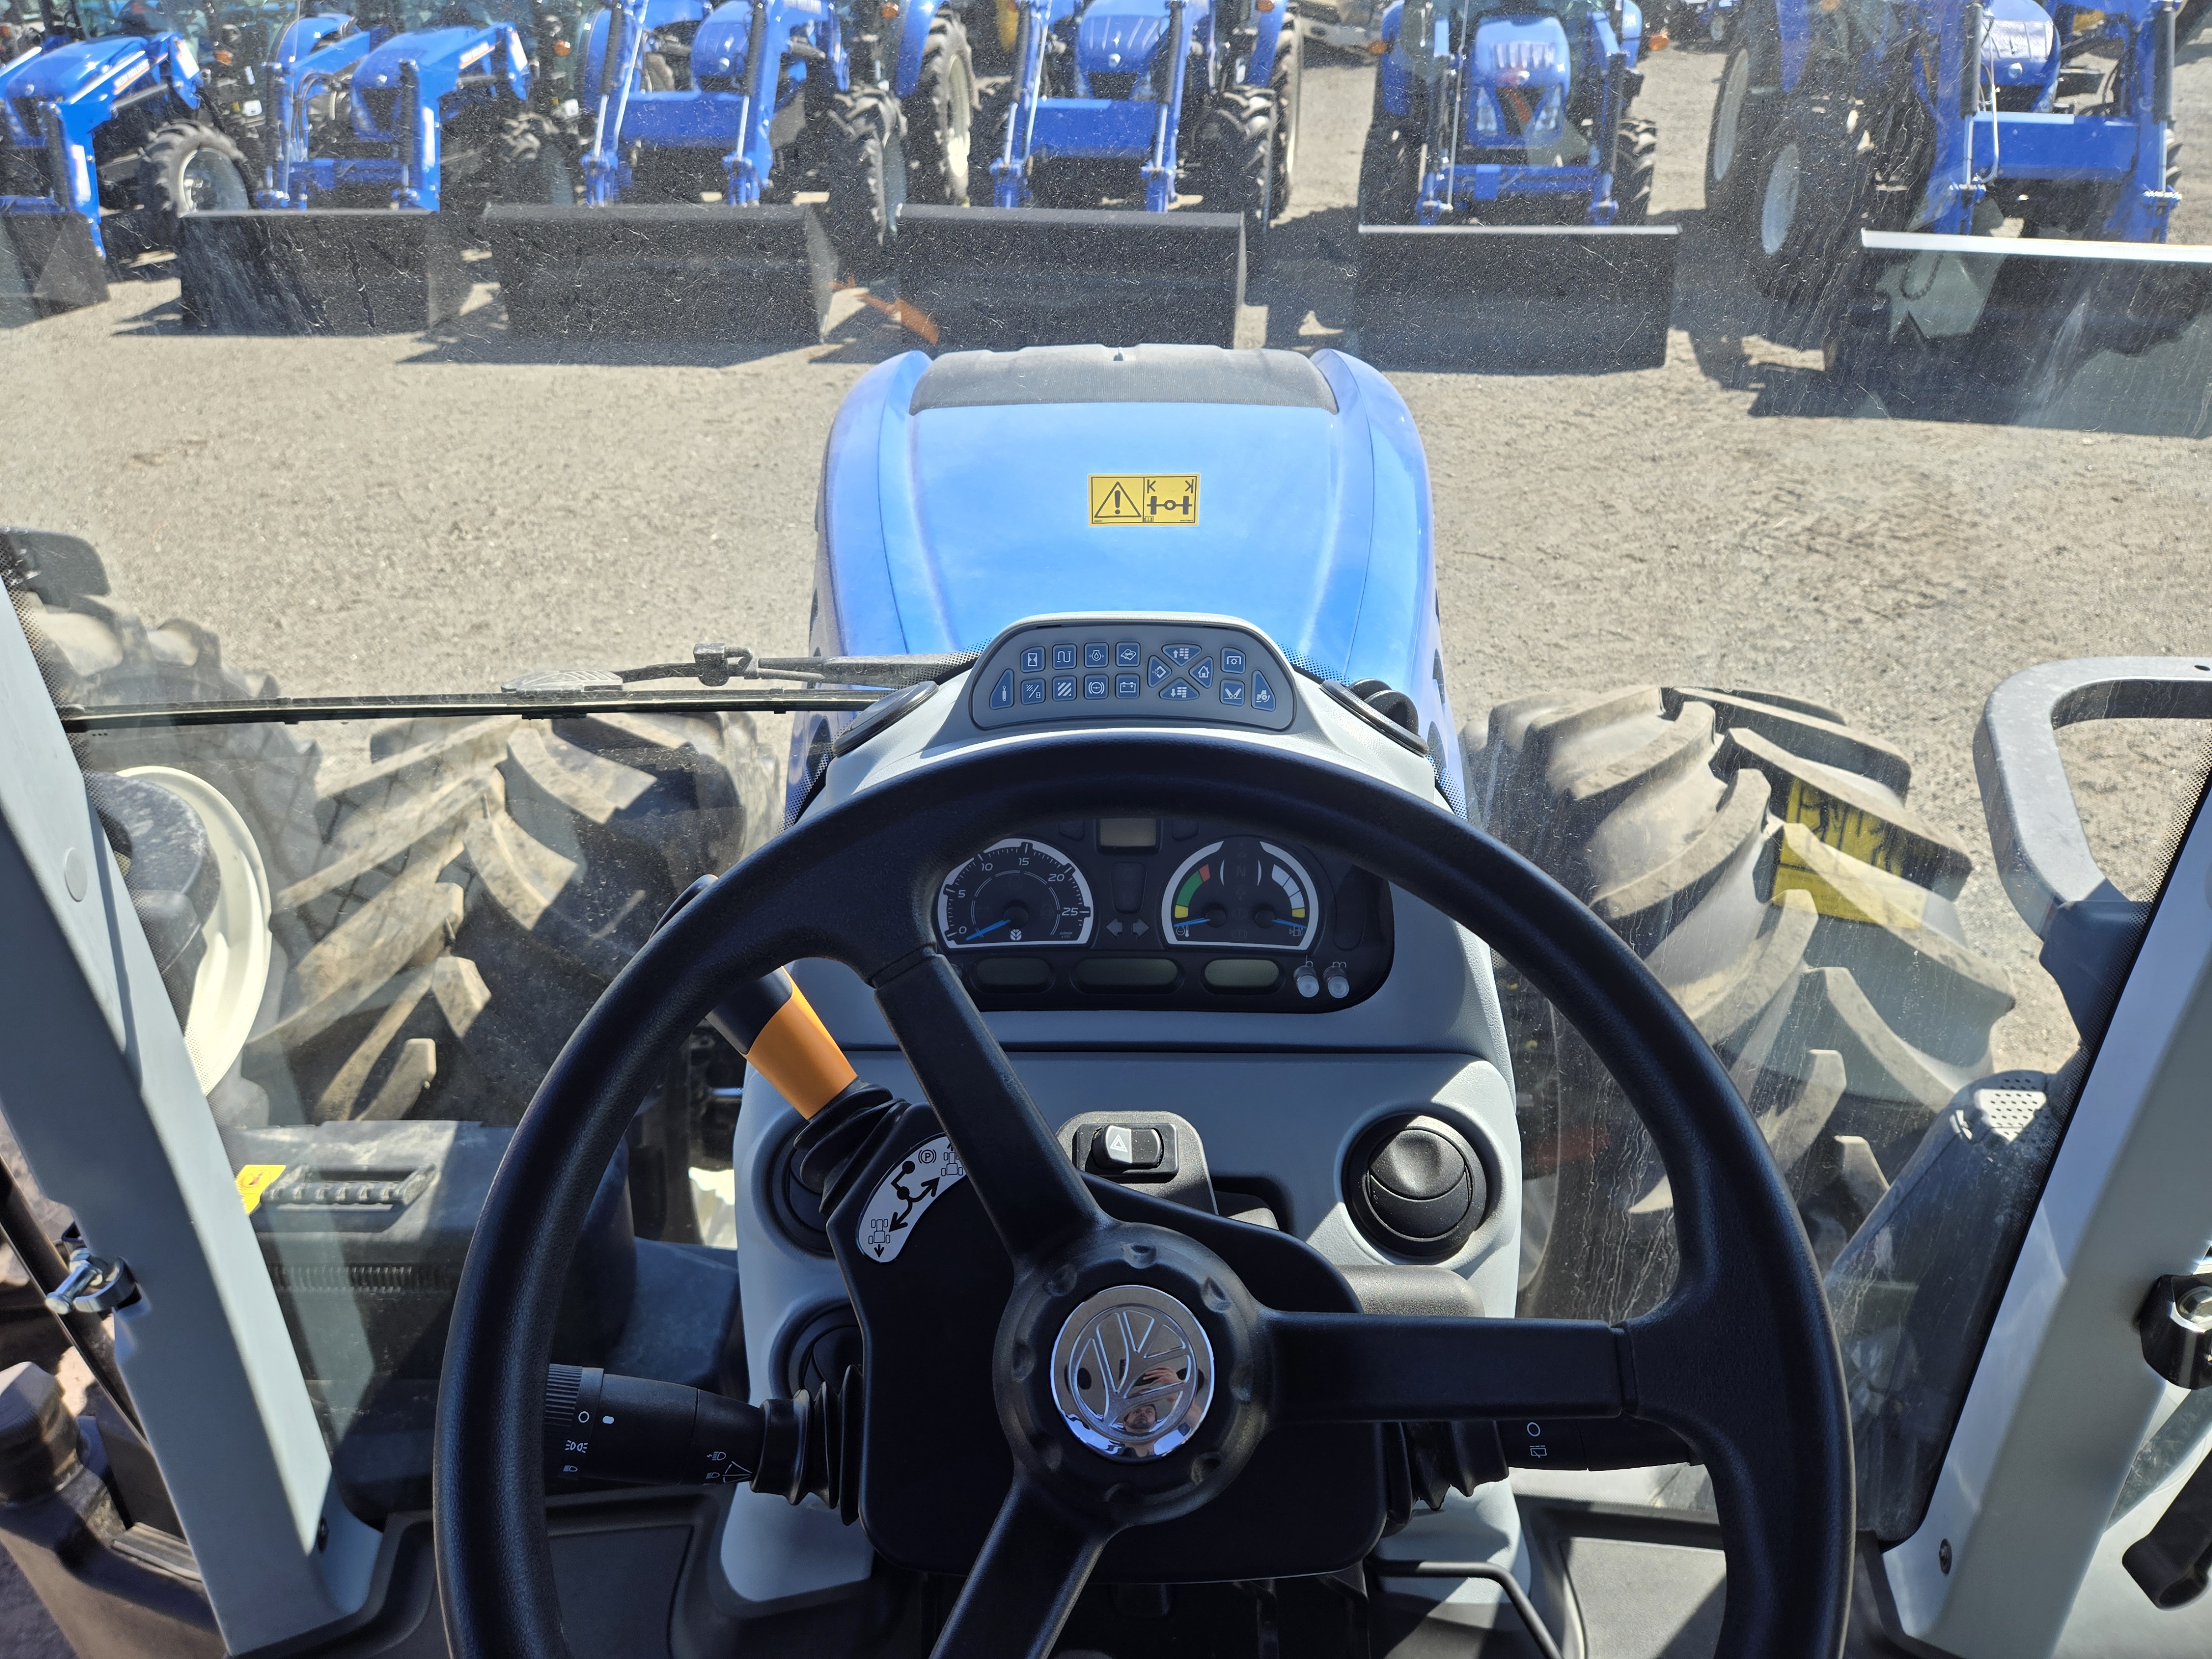 2021 New Holland T7.260 Tractor